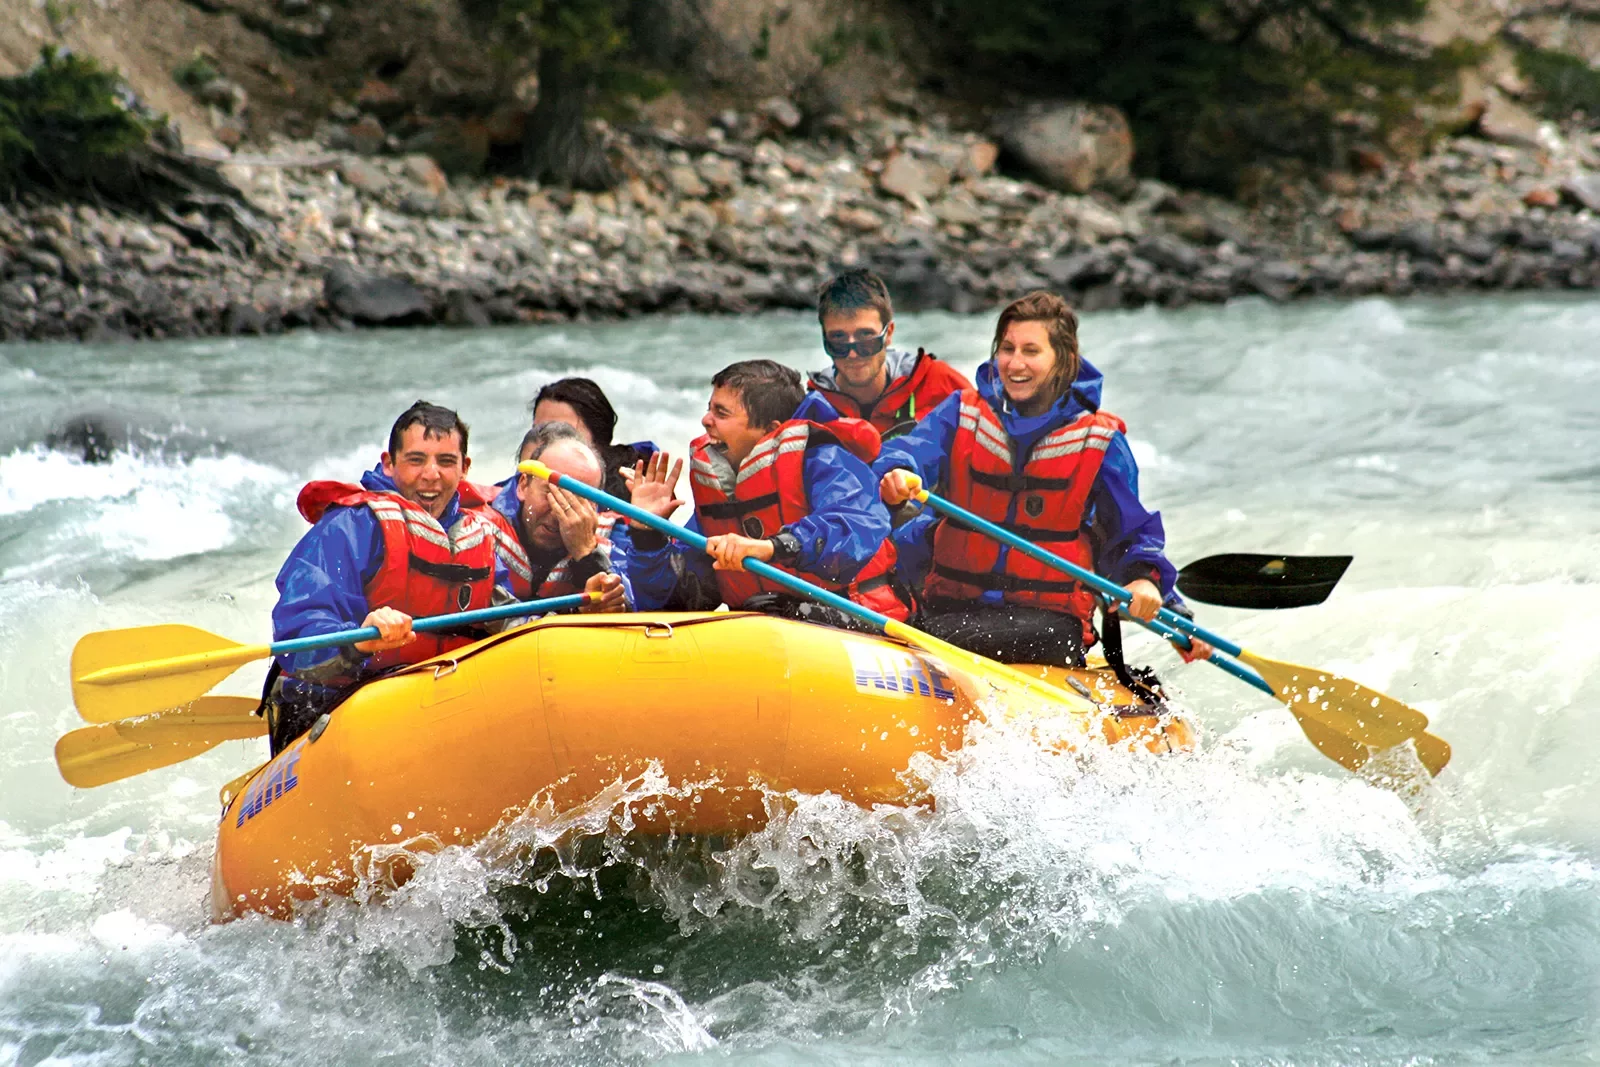 Family rafting down a river in Canada